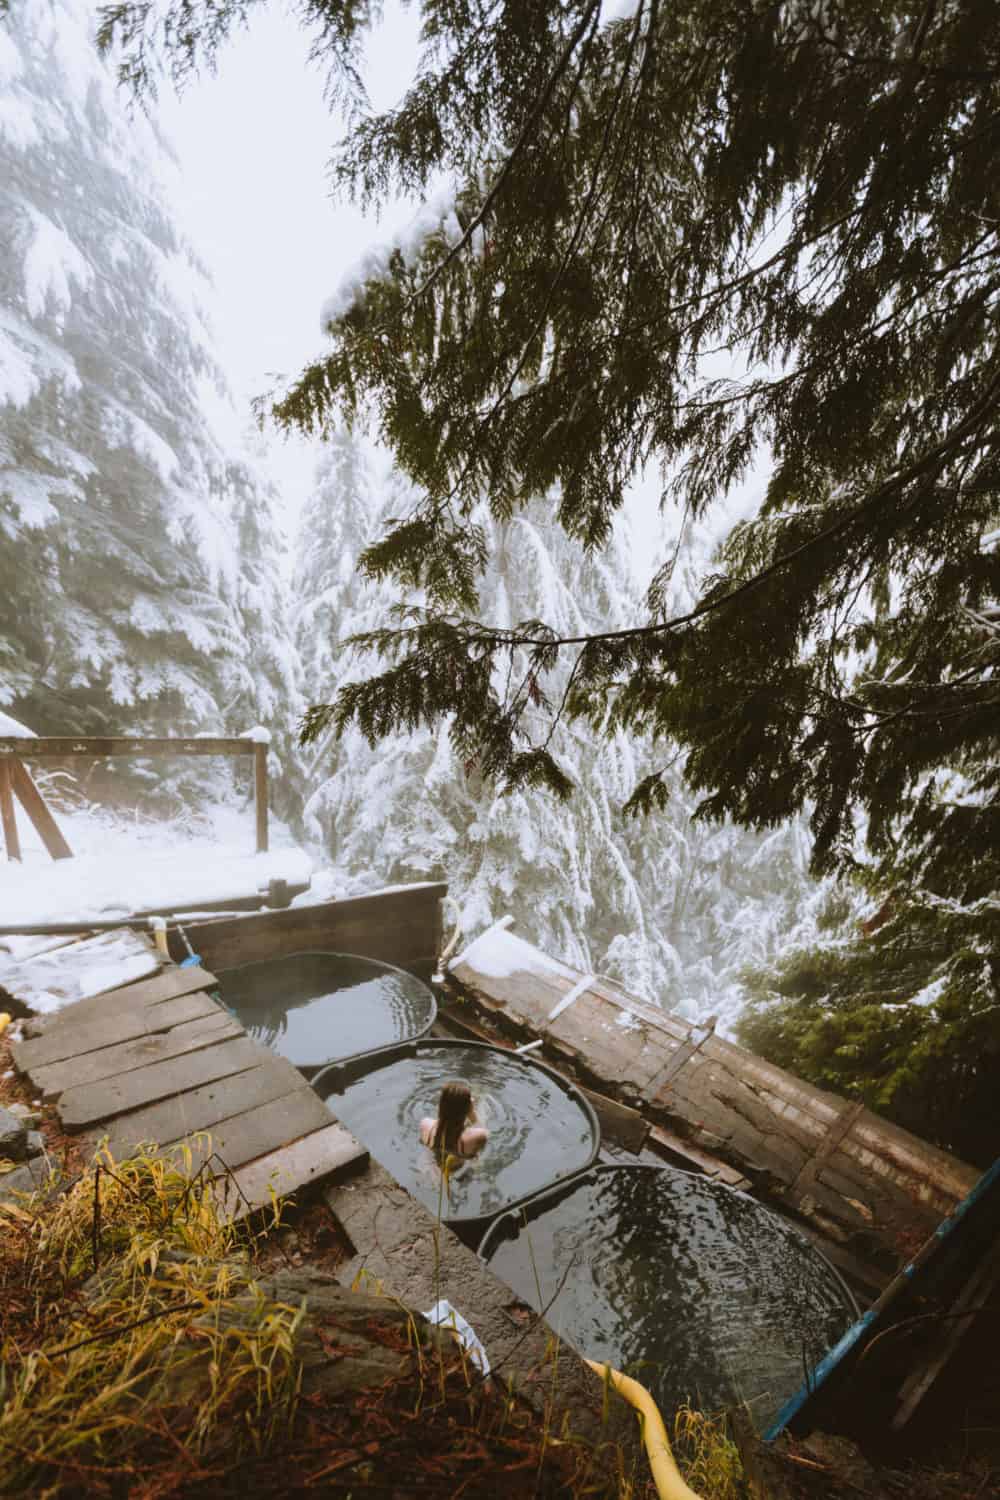 Looking for a winter getaway? Look no further that this dense-forest scenic hot springs in the Cascade mountains of Washington! Read of to find out how to get here and get relaxing right away! TheMandagies.com